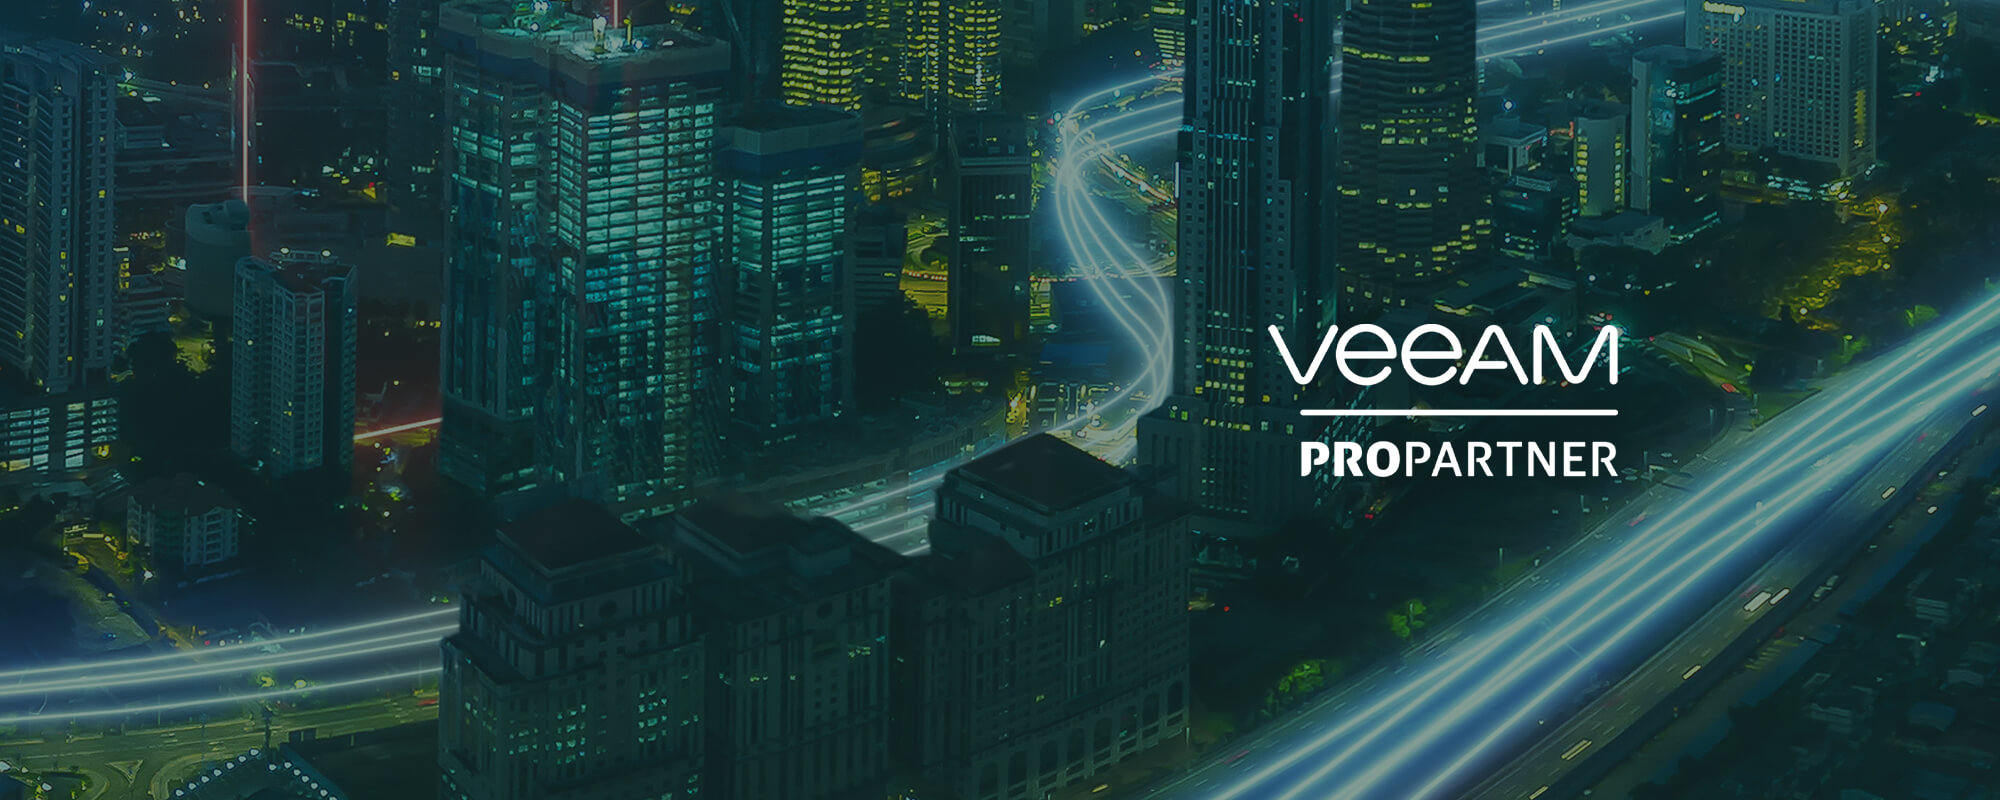 CyberNova is now an official Veeam Reseller and Service Partner